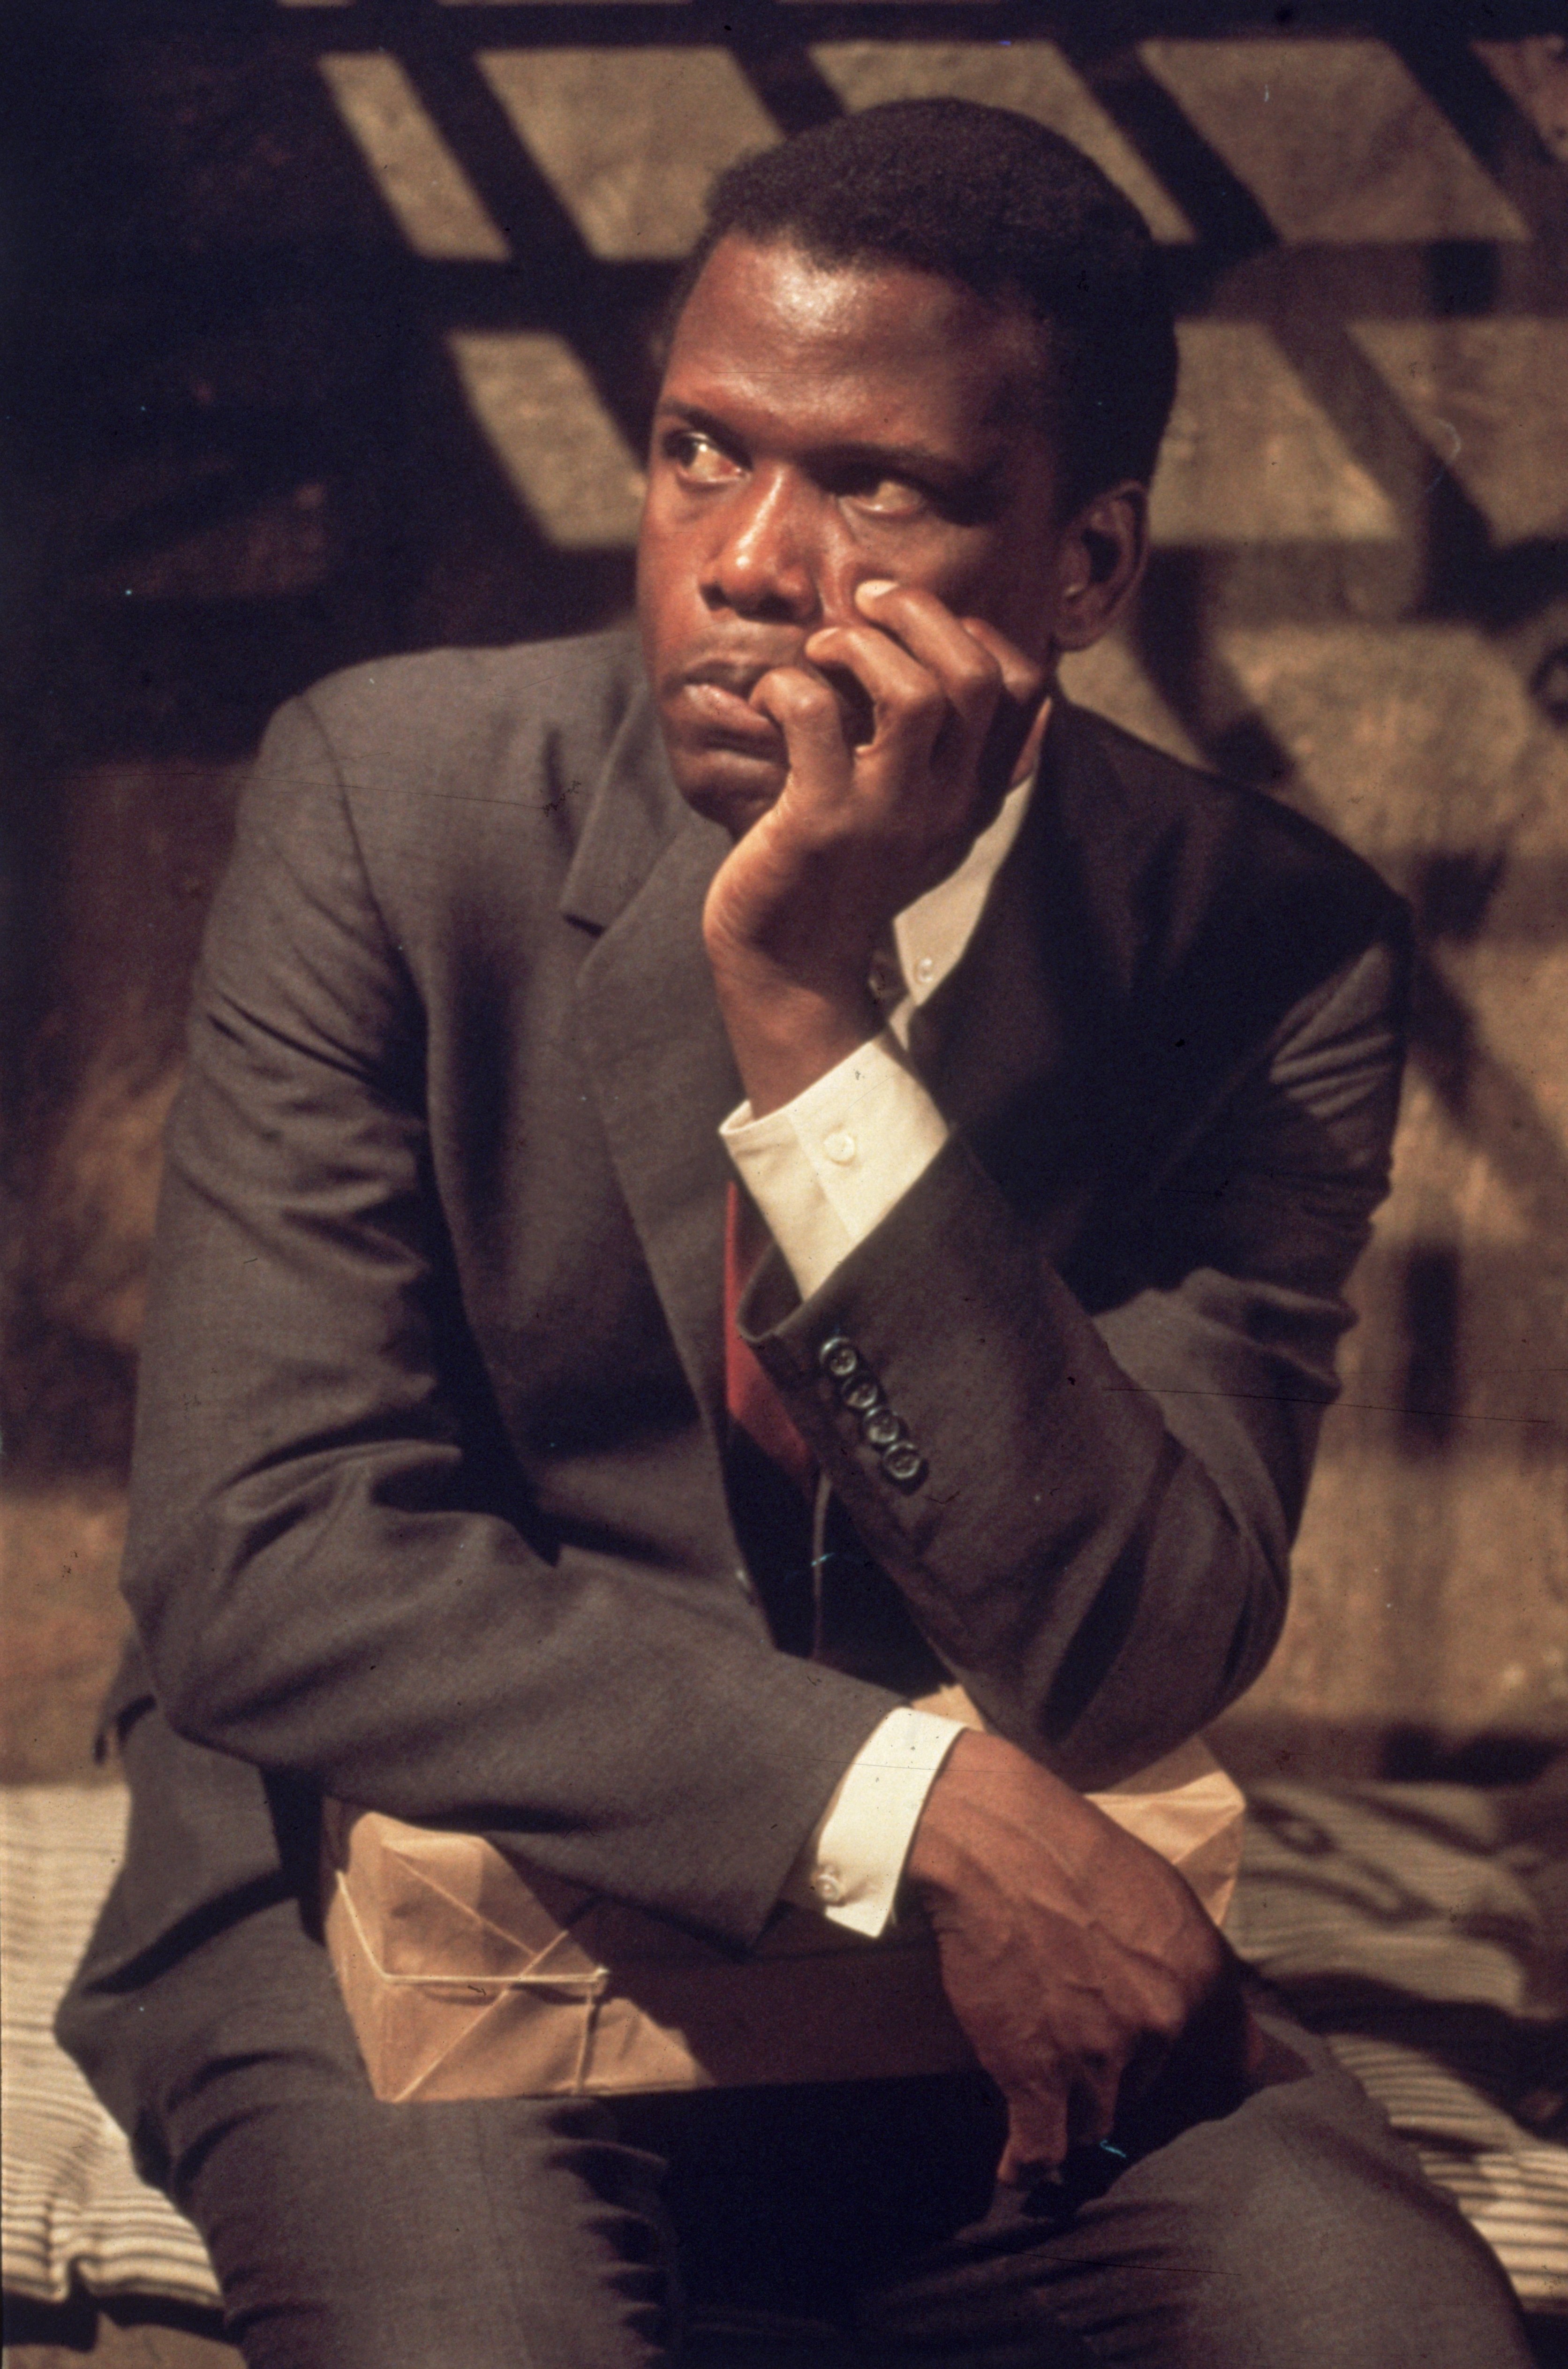 Sidney Poitier photographed while filming "In the Heat of the Night" in 1967. | Photo: Getty Images